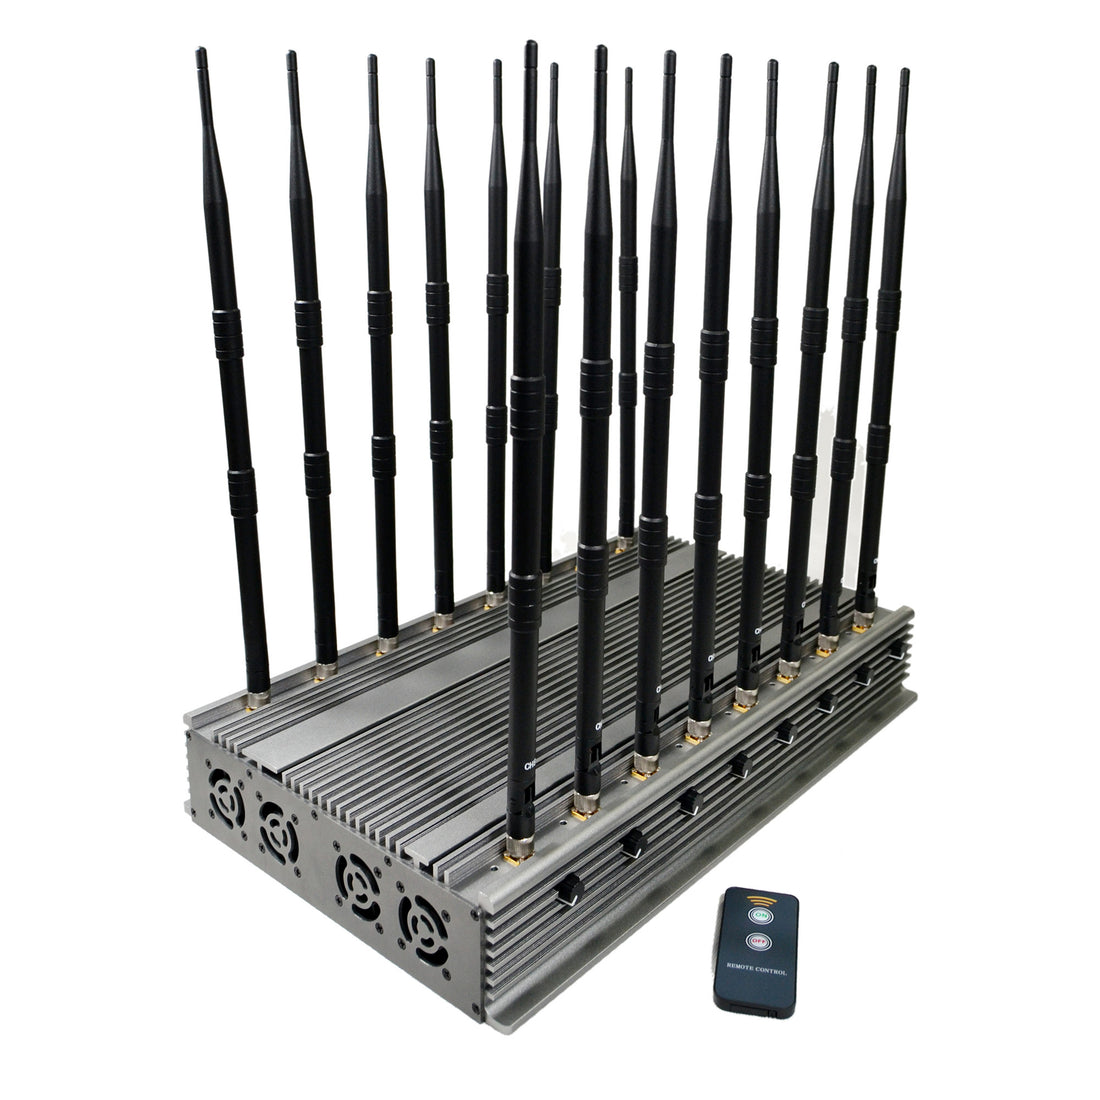 Is a conference room full-band jammer suitable for a directional antenna or an omnidirectional antenna?